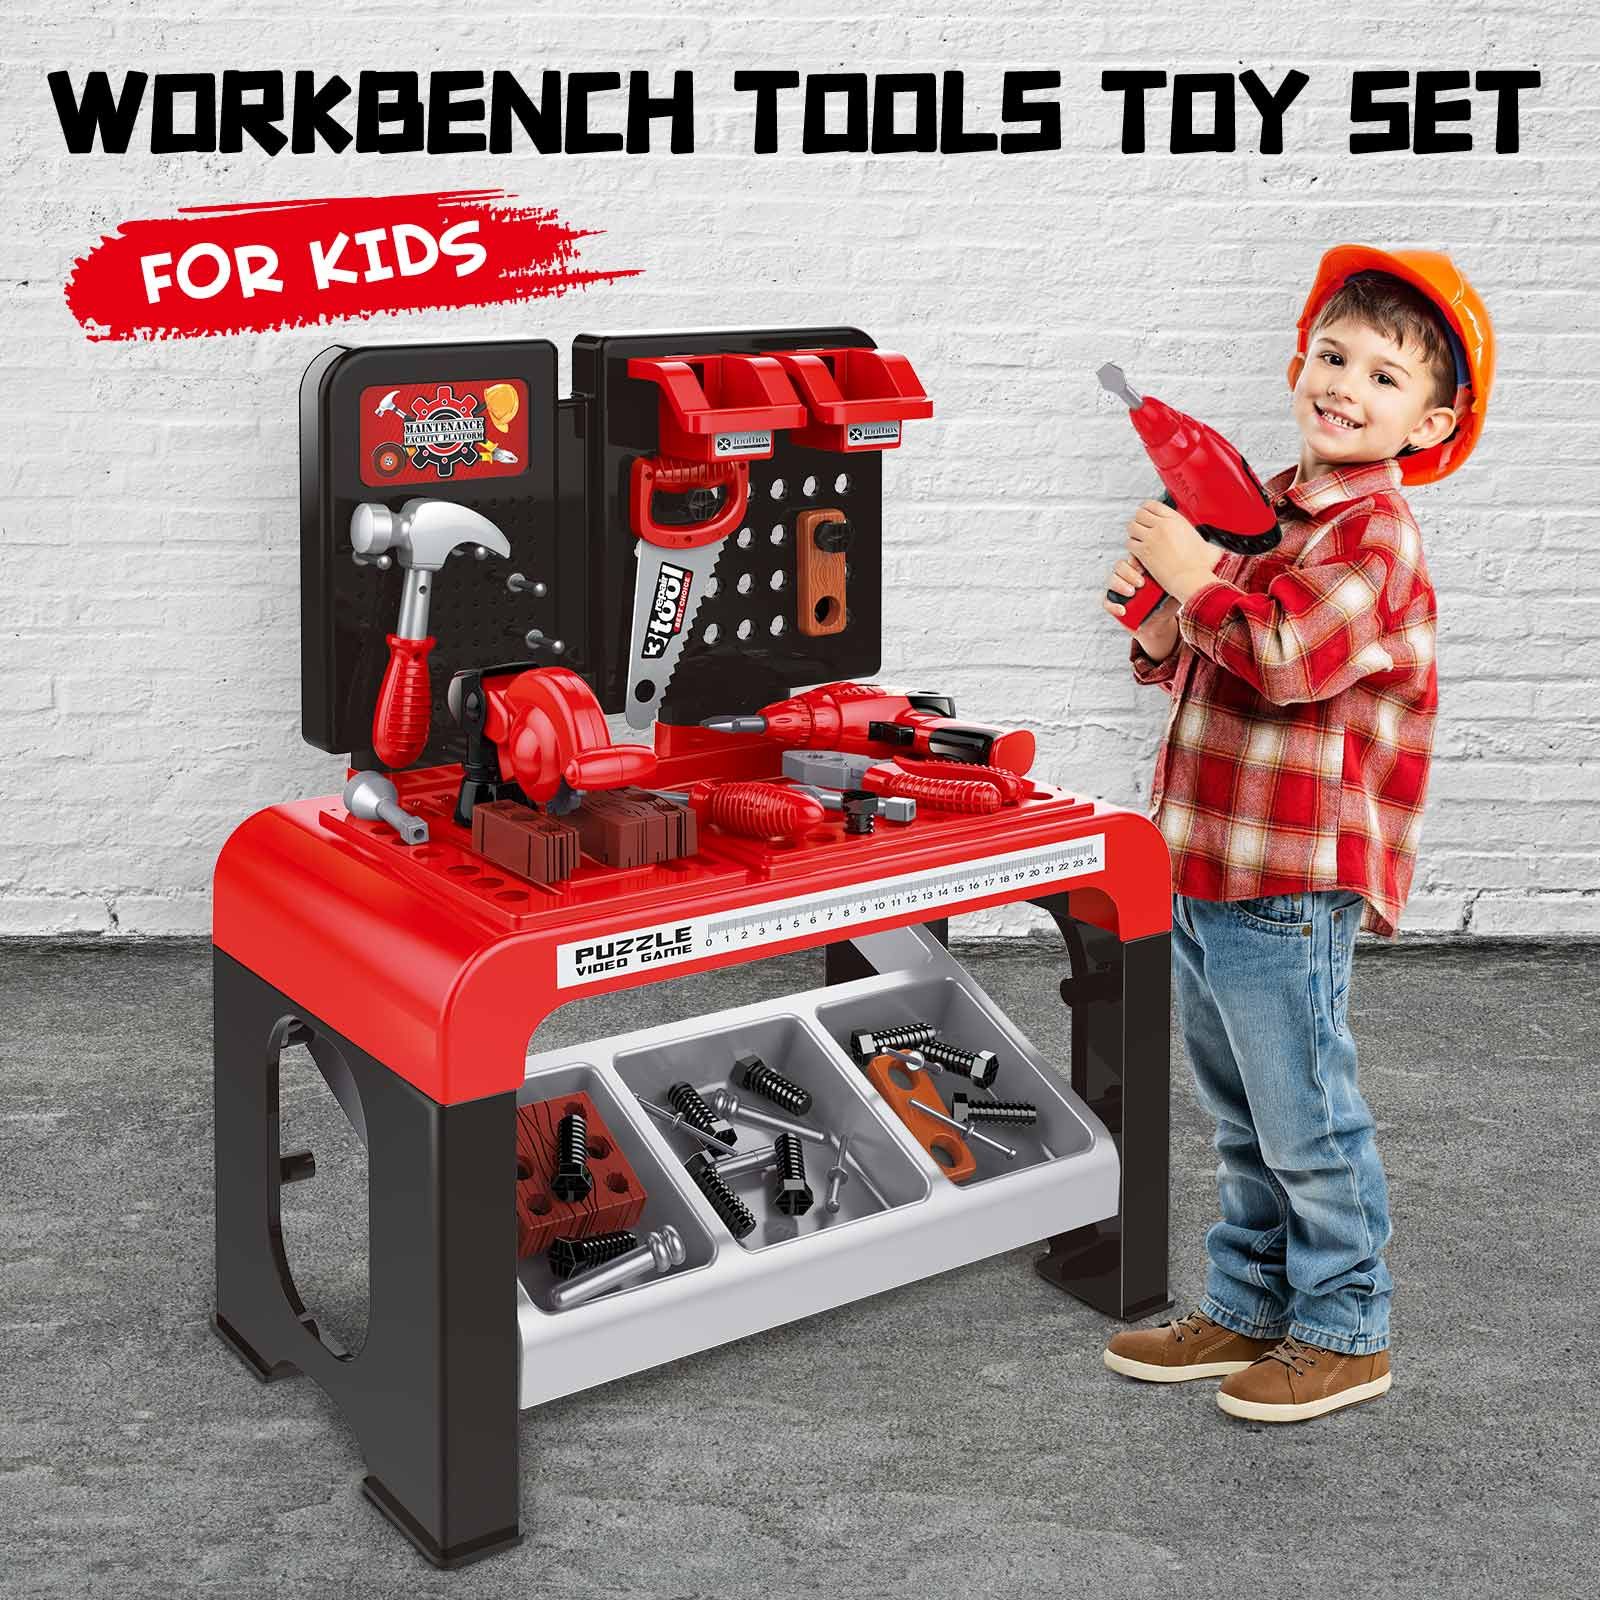 Kids Workbench Tool Bench Construction Toy Set 46pcs Educational Builder Pretend Role Play Gift for Children Toddlers boys